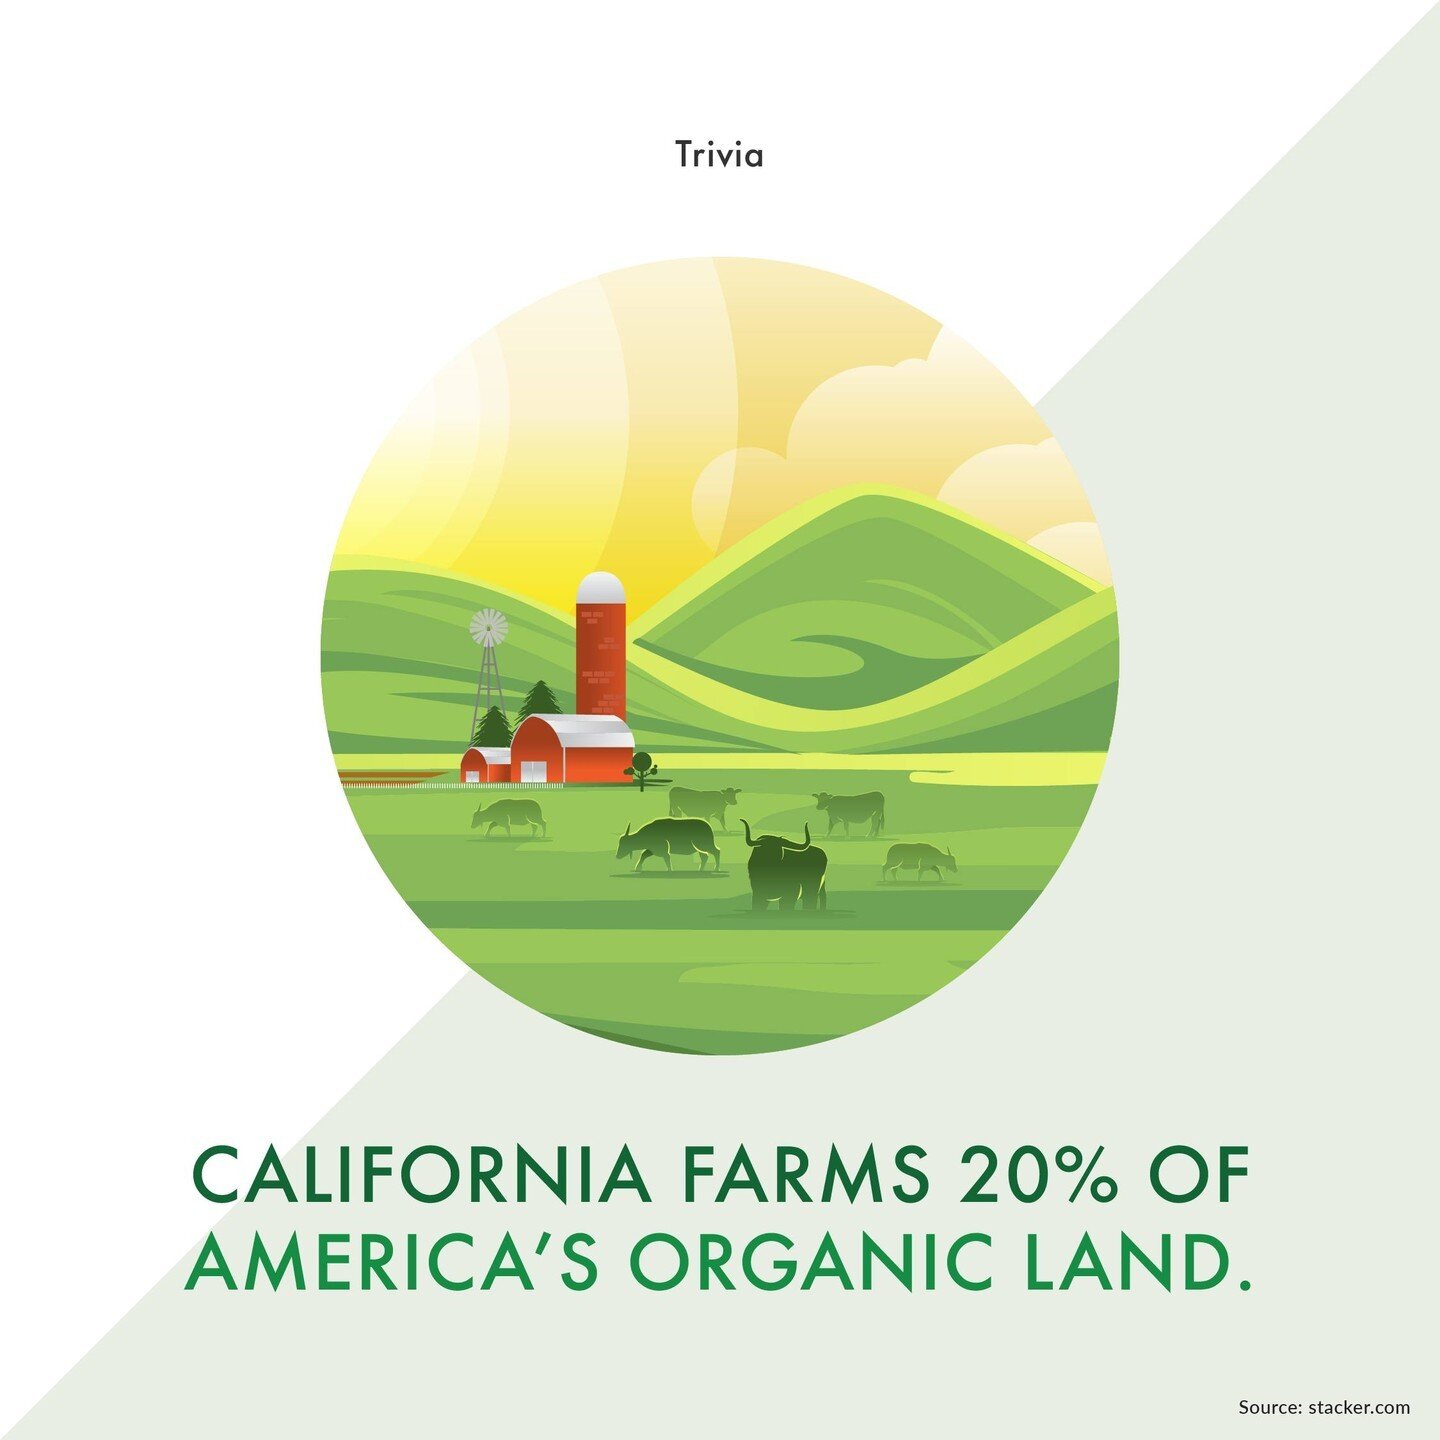 California has 2,700 organic farms, about one-fifth of the country&rsquo;s total organic land. Only two other states&mdash;Wisconsin and New York&mdash;have more than 1,000 organic farms.

#ThursdayTrivia #Farm #Farmers #FoodSupplier #Agriculture #HV